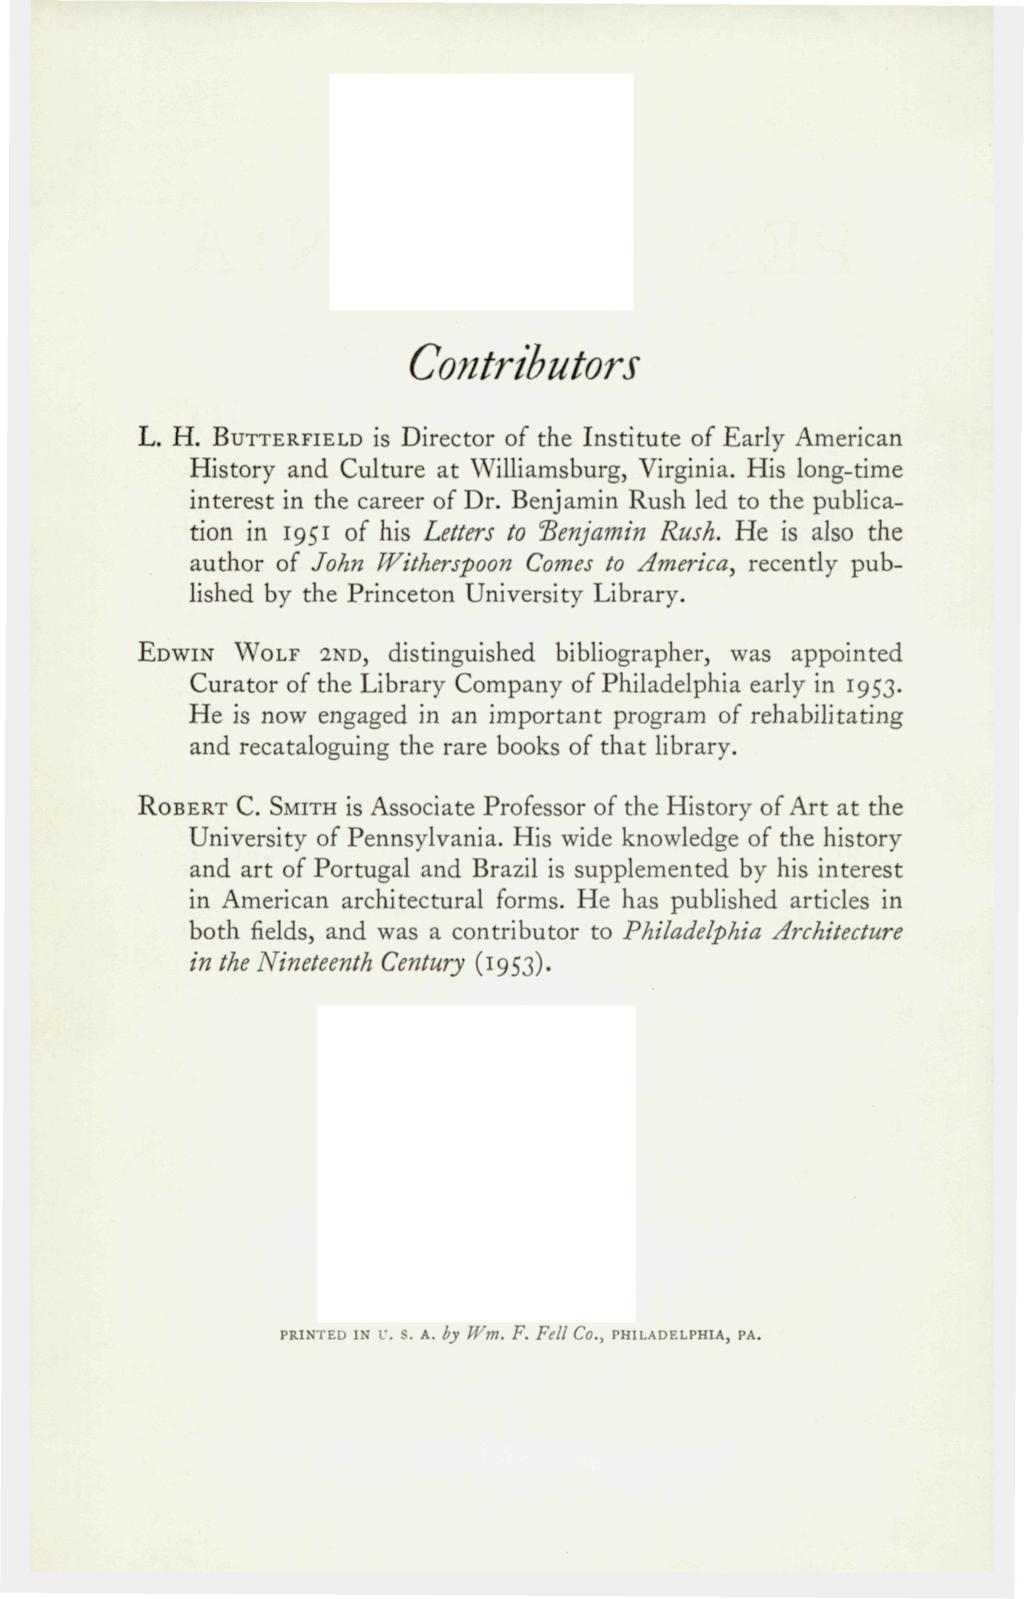 Contributors L. H. BUTTERFIELD is Director of the Institute of Early American History and Culture at Wilhamsburg, Virginia. His long-time interest in the career of Dr.